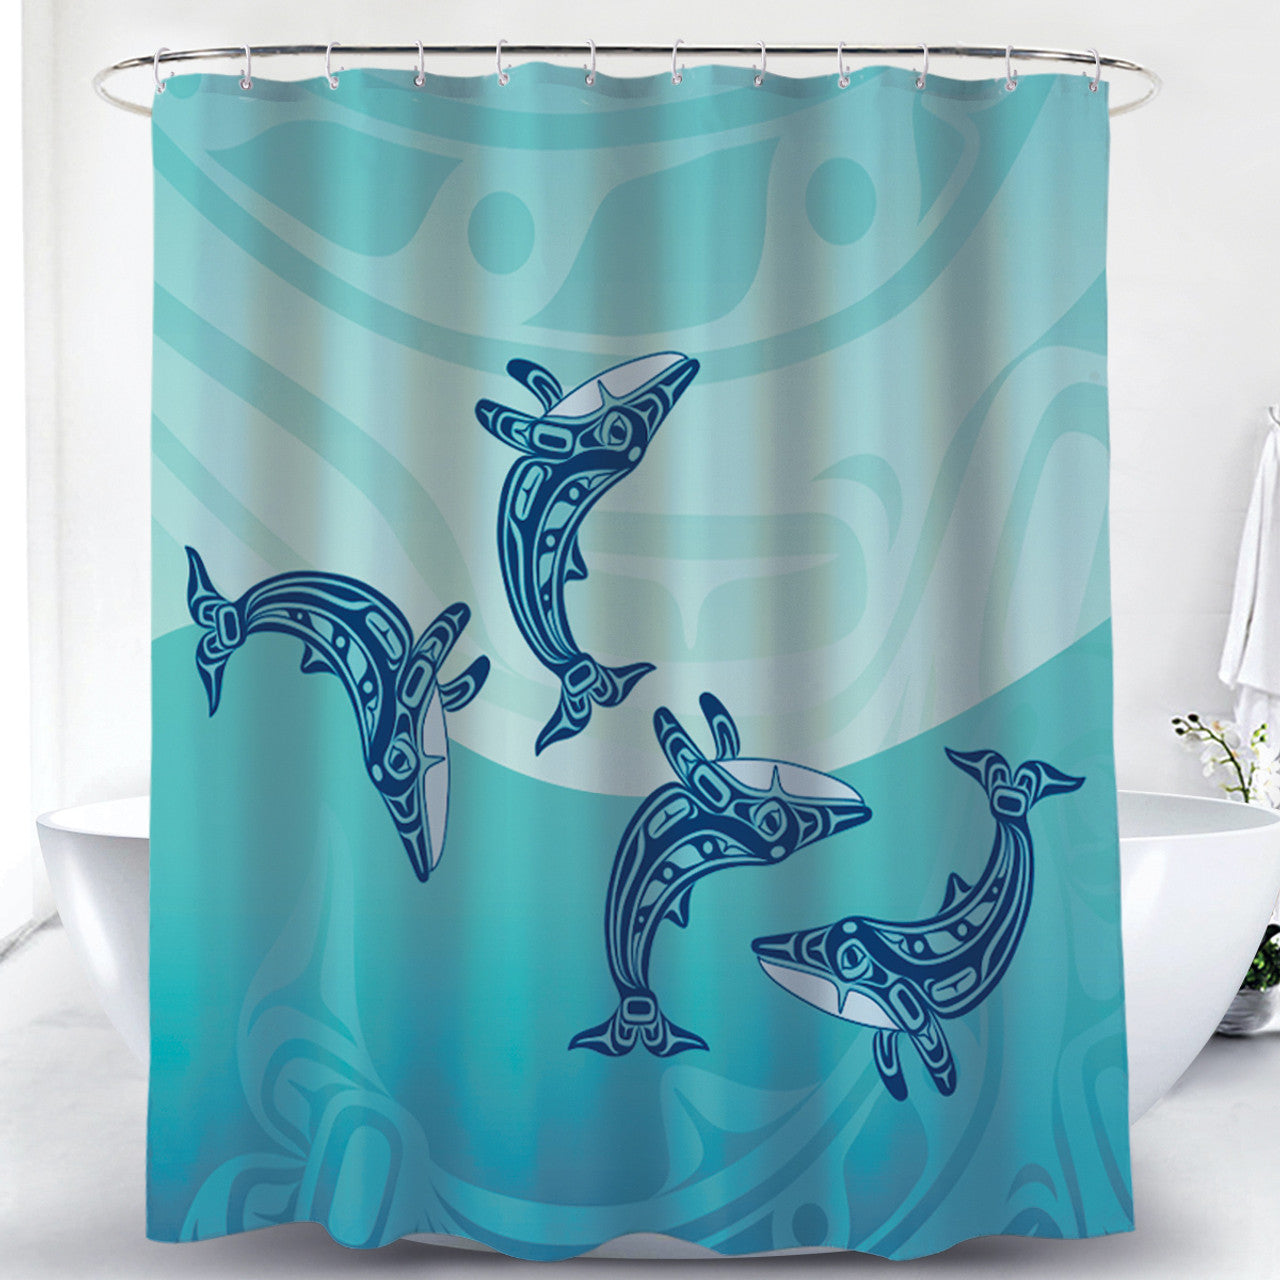 Indigenous Designed Shower Curtain -  Humpback Whale